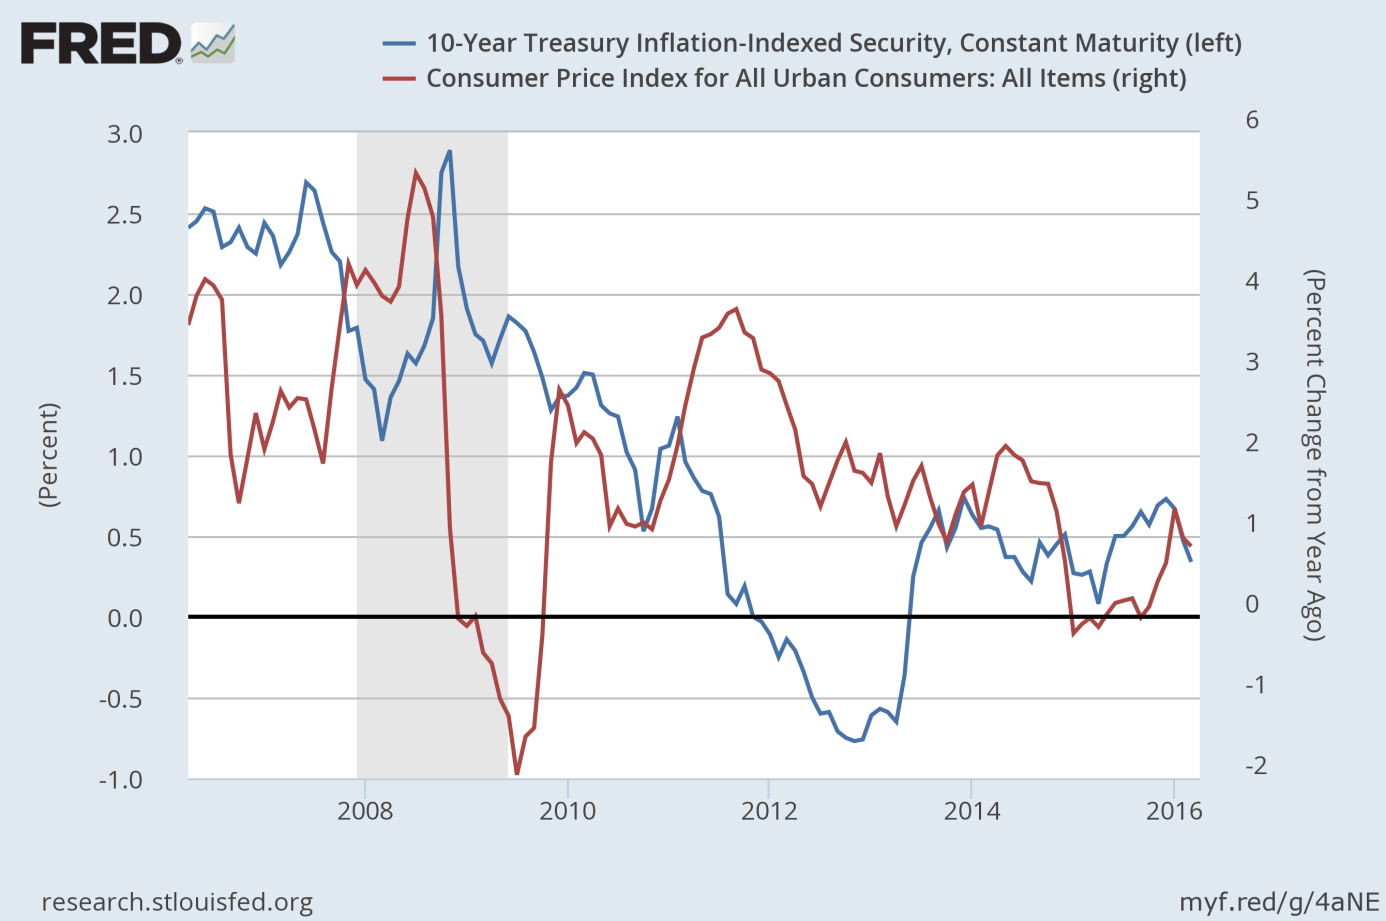 The CPI and real interest rates